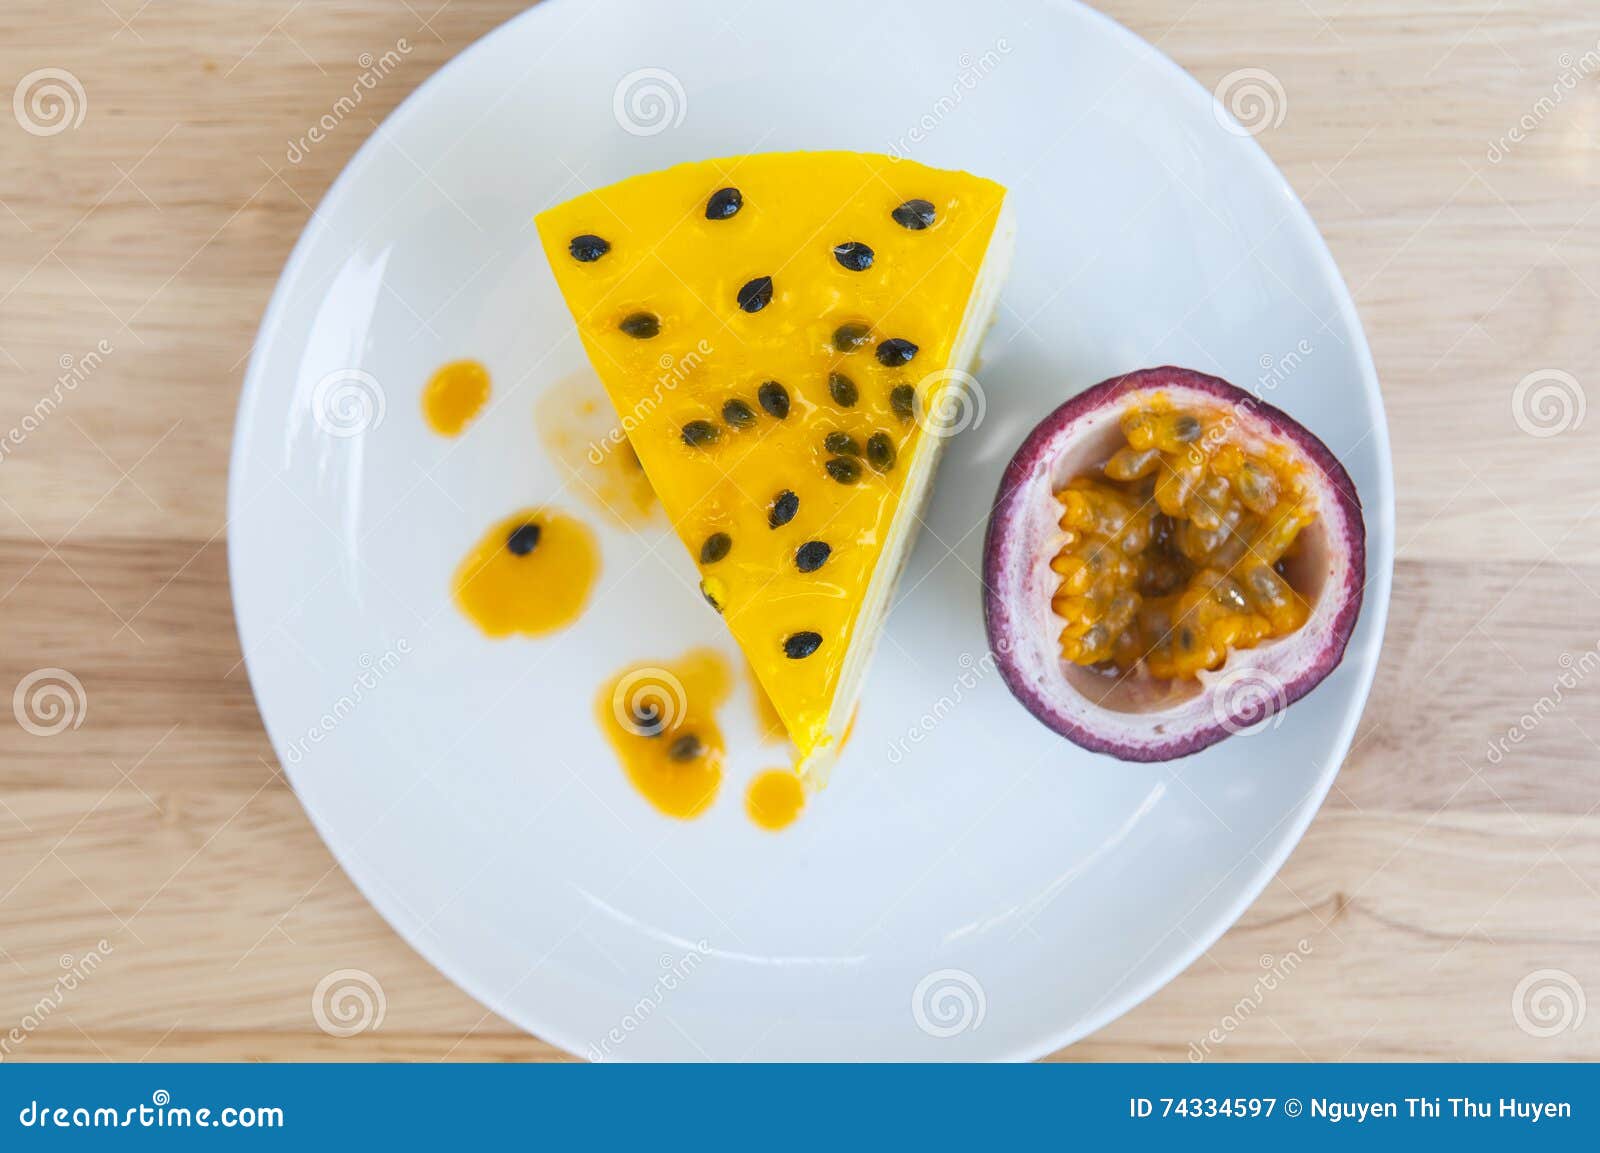 Passion fruit cheesecake stock image. Image of eating - 74334597